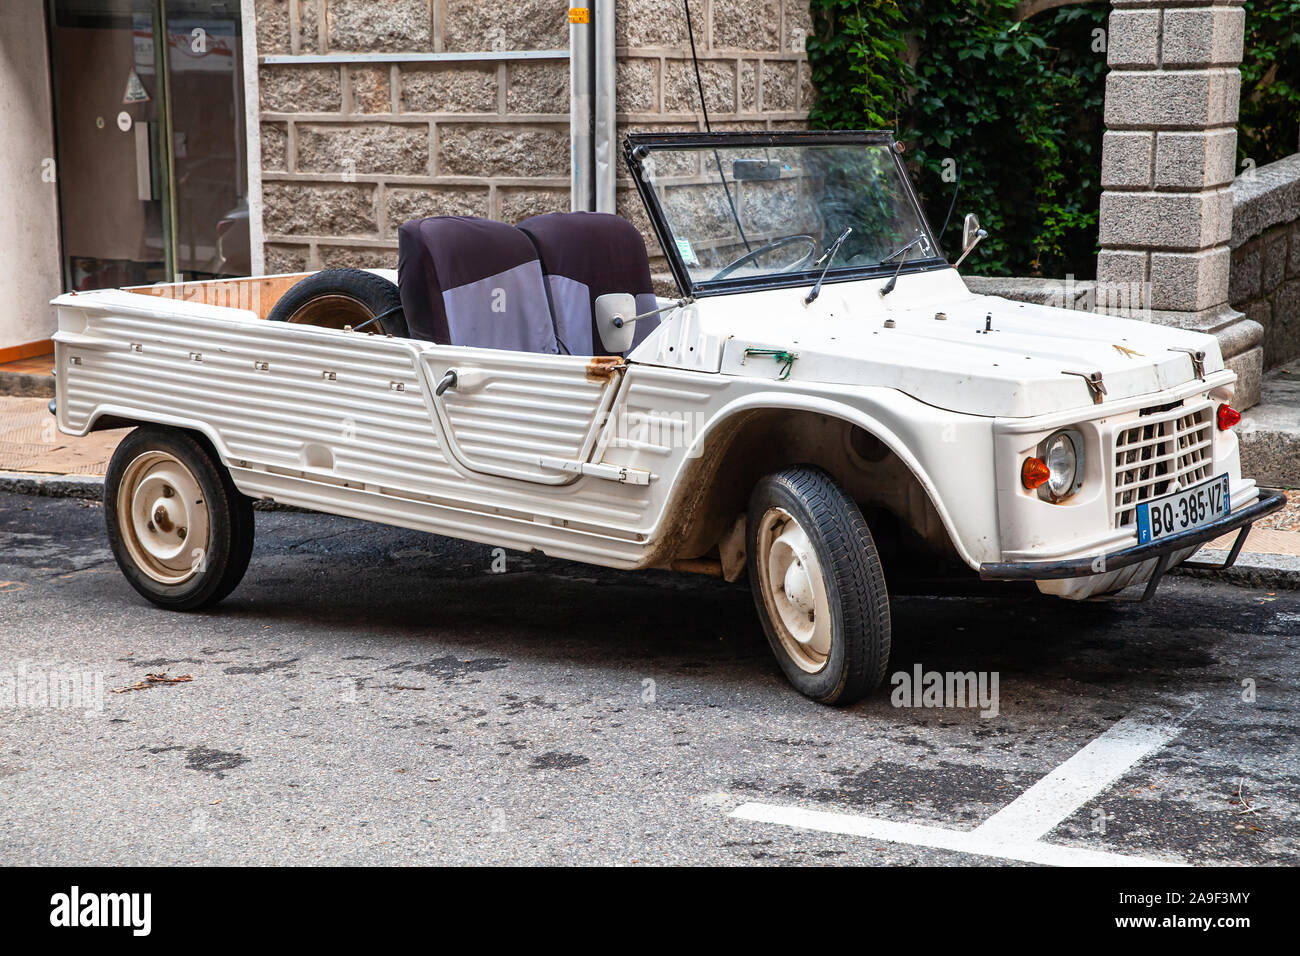 Sartene, France - August 19, 2018: Vintage white Citroen Mehari car stands parked on a street in France Stock Photo